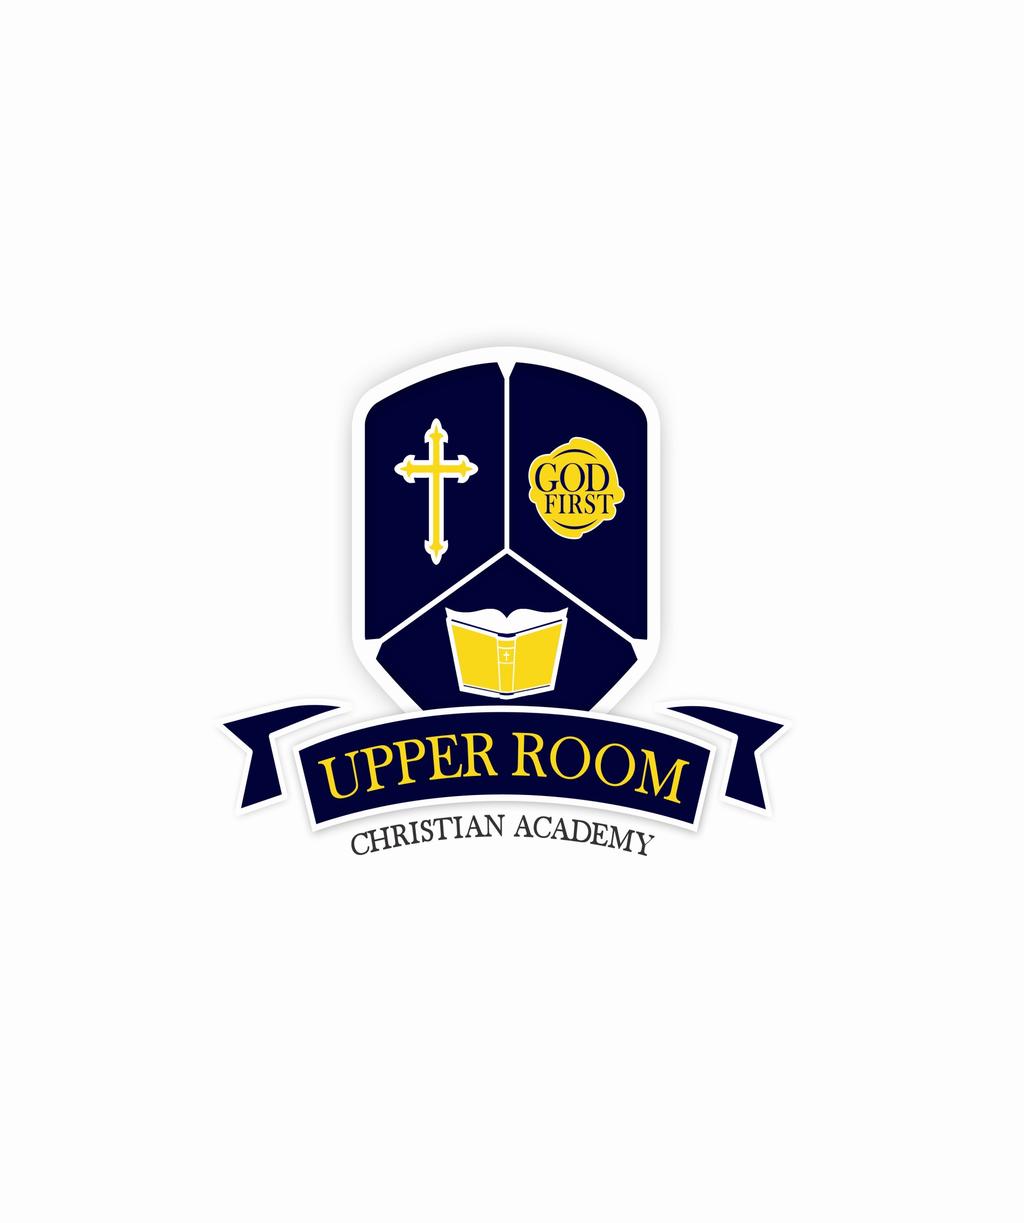 The Upper Room Christian Academy exists to partner with families and churches to prepare students for biblical, academic and social